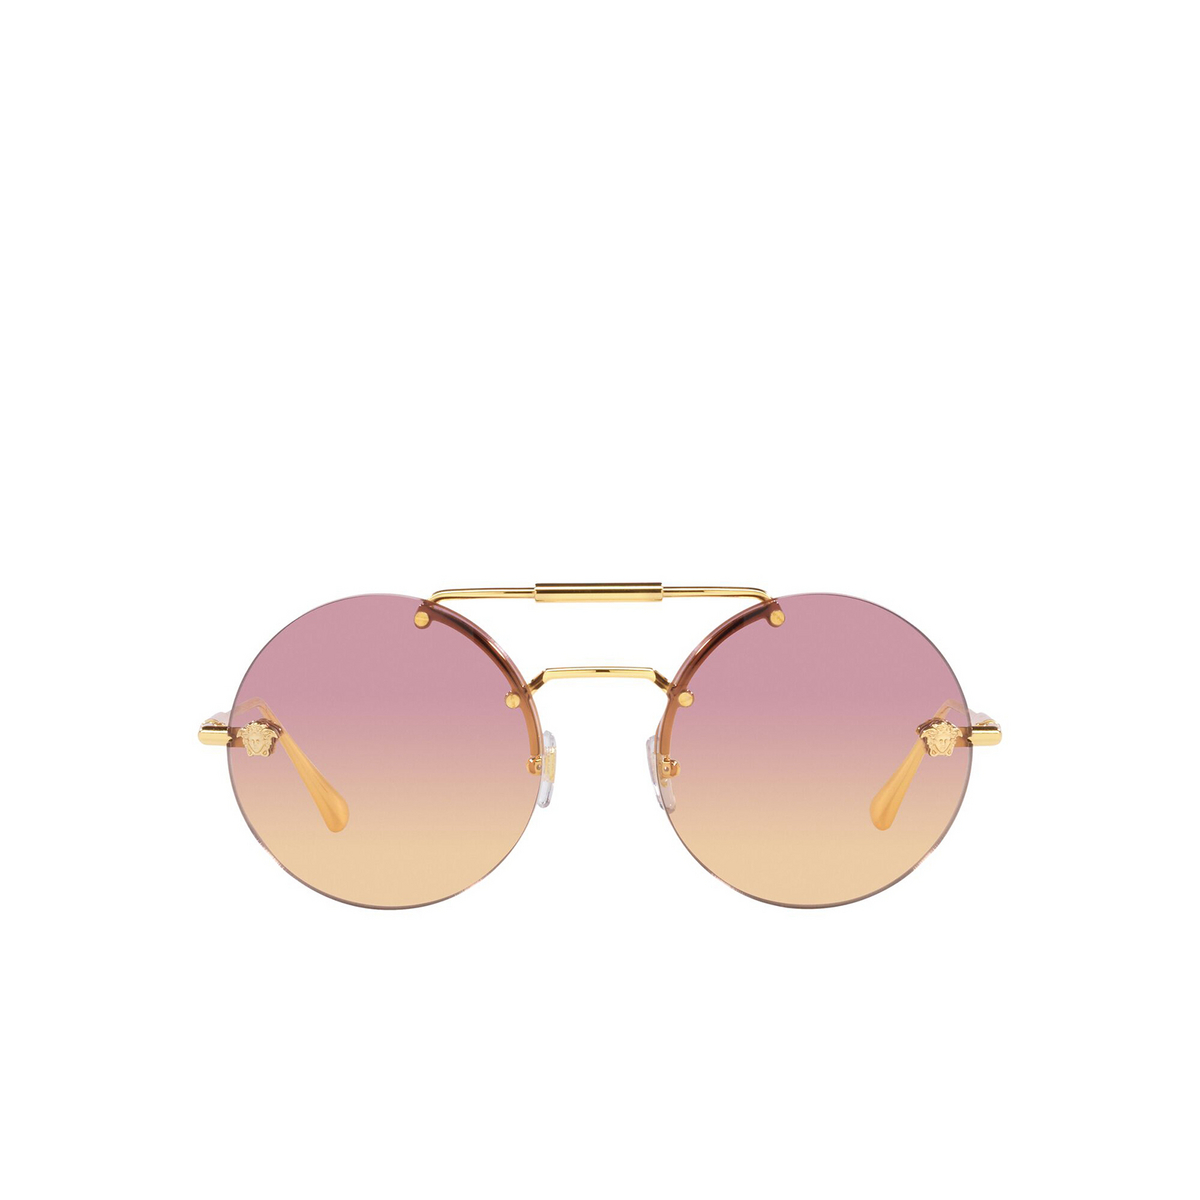 Versace® Round Sunglasses: VE2244 color Gold 100278 - front view.